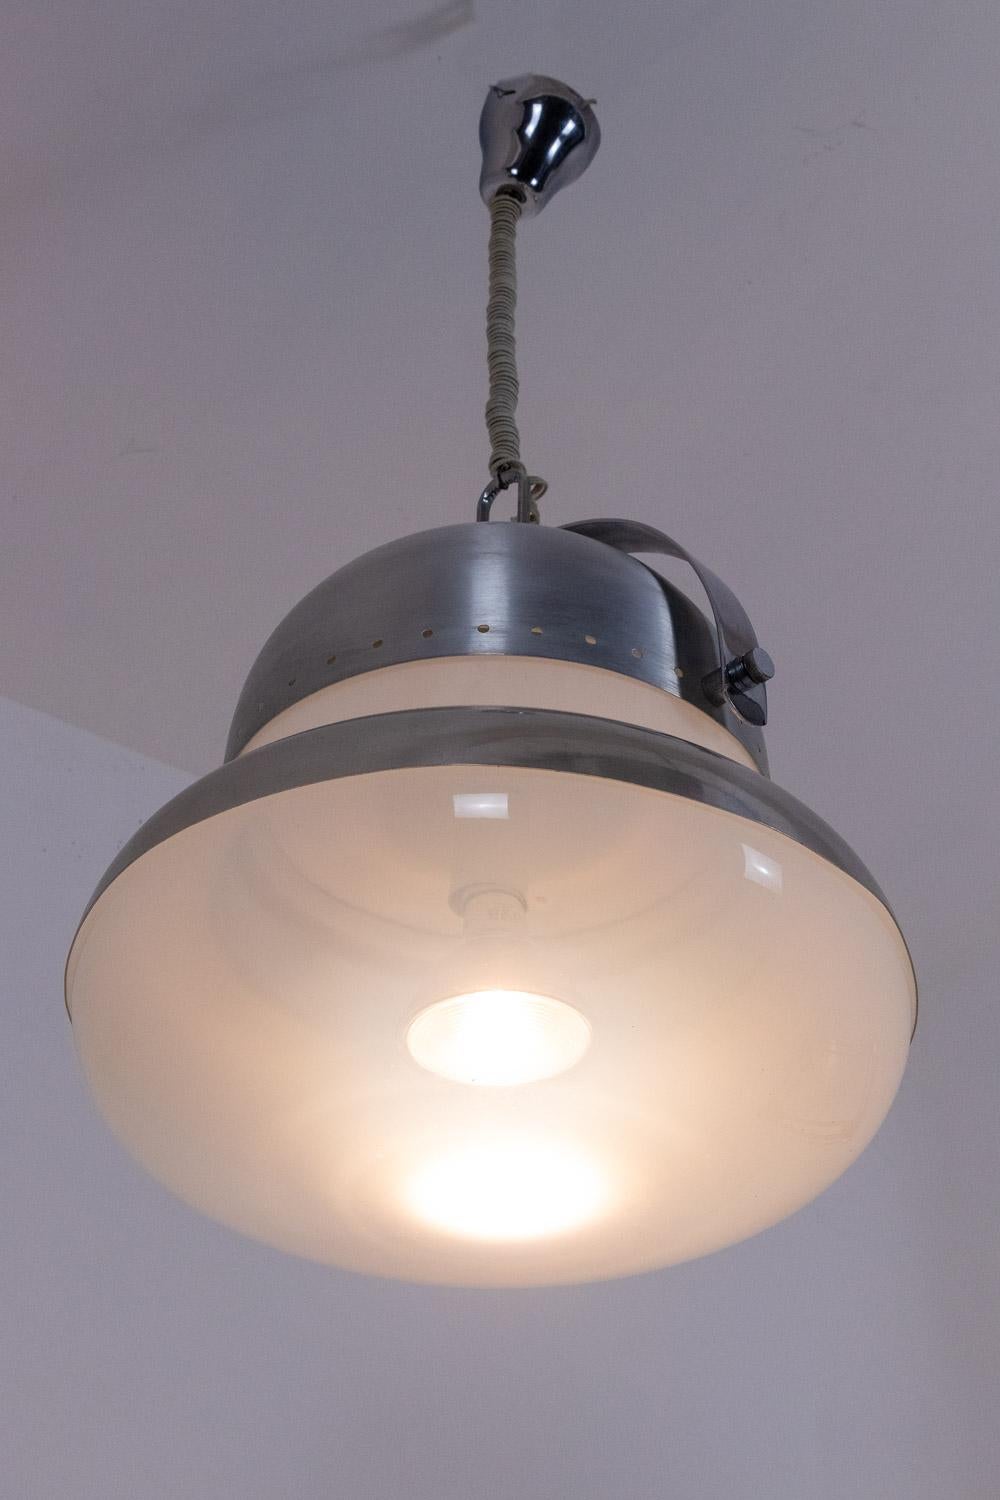 Industrial style pendant light in brushed and opaline white metal, circular in shape.

Italian work realized in the 1970s.

Dimensions: H 130 x D 50 cm

Reference: LS5265309I